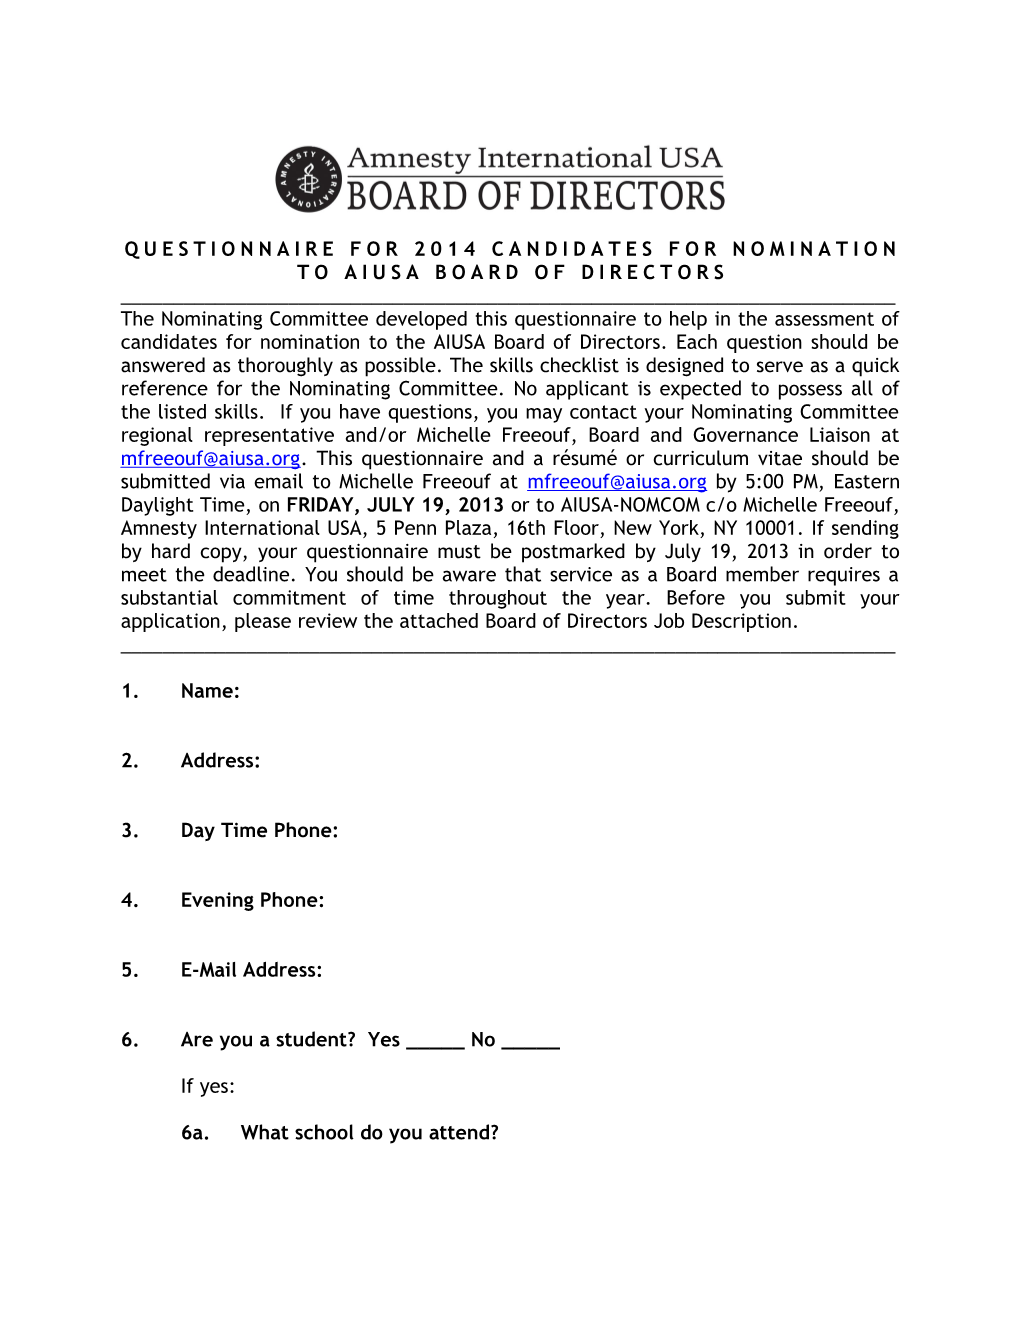 Questionnaire for 2014 Candidates for Nomination to Aiusaboard of Directors